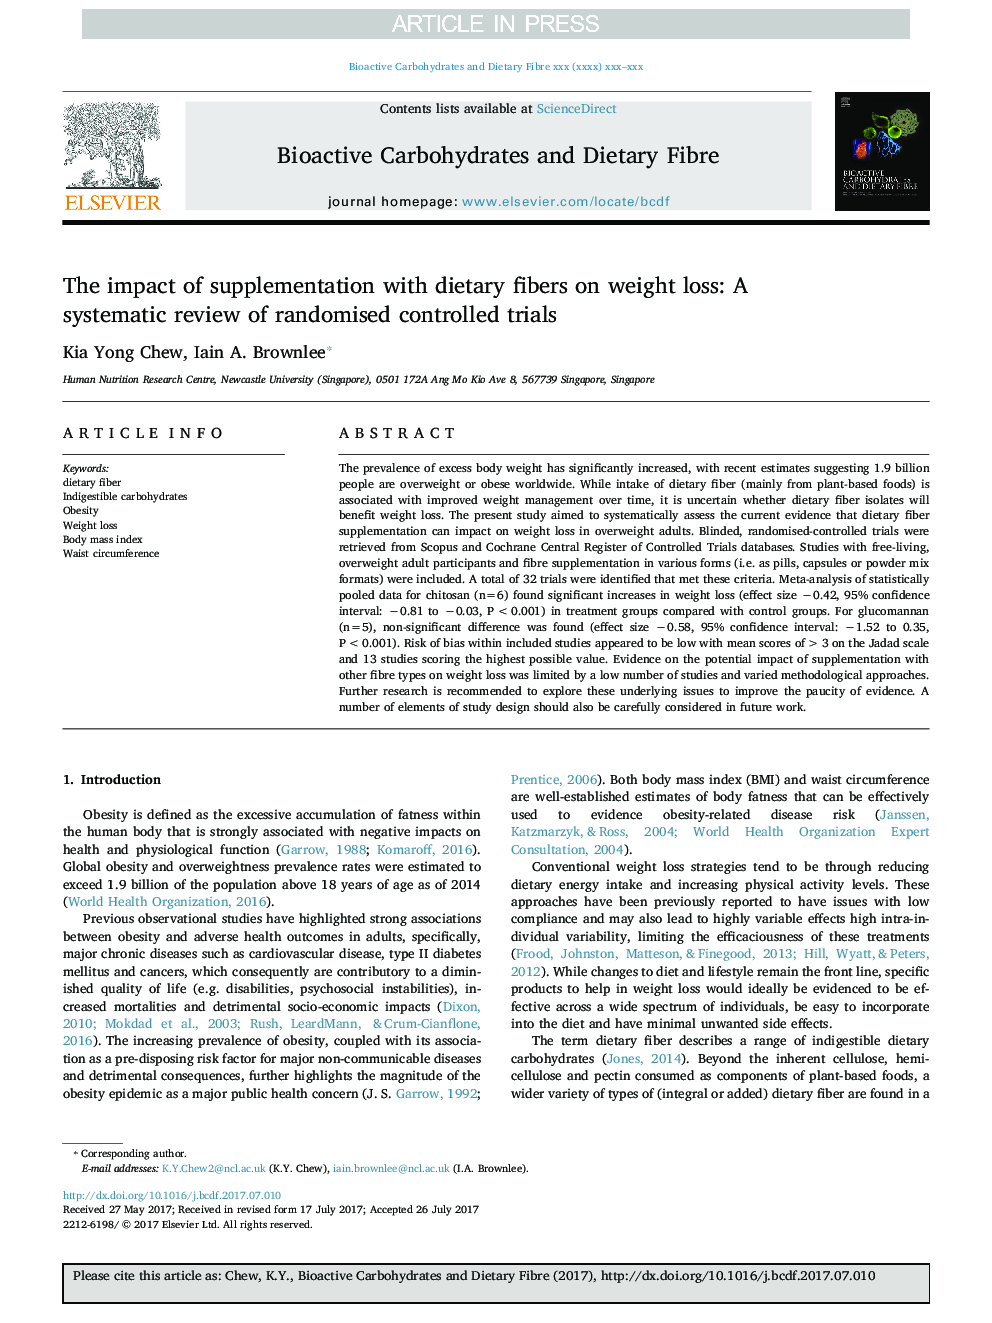 The impact of supplementation with dietary fibers on weight loss: A systematic review of randomised controlled trials